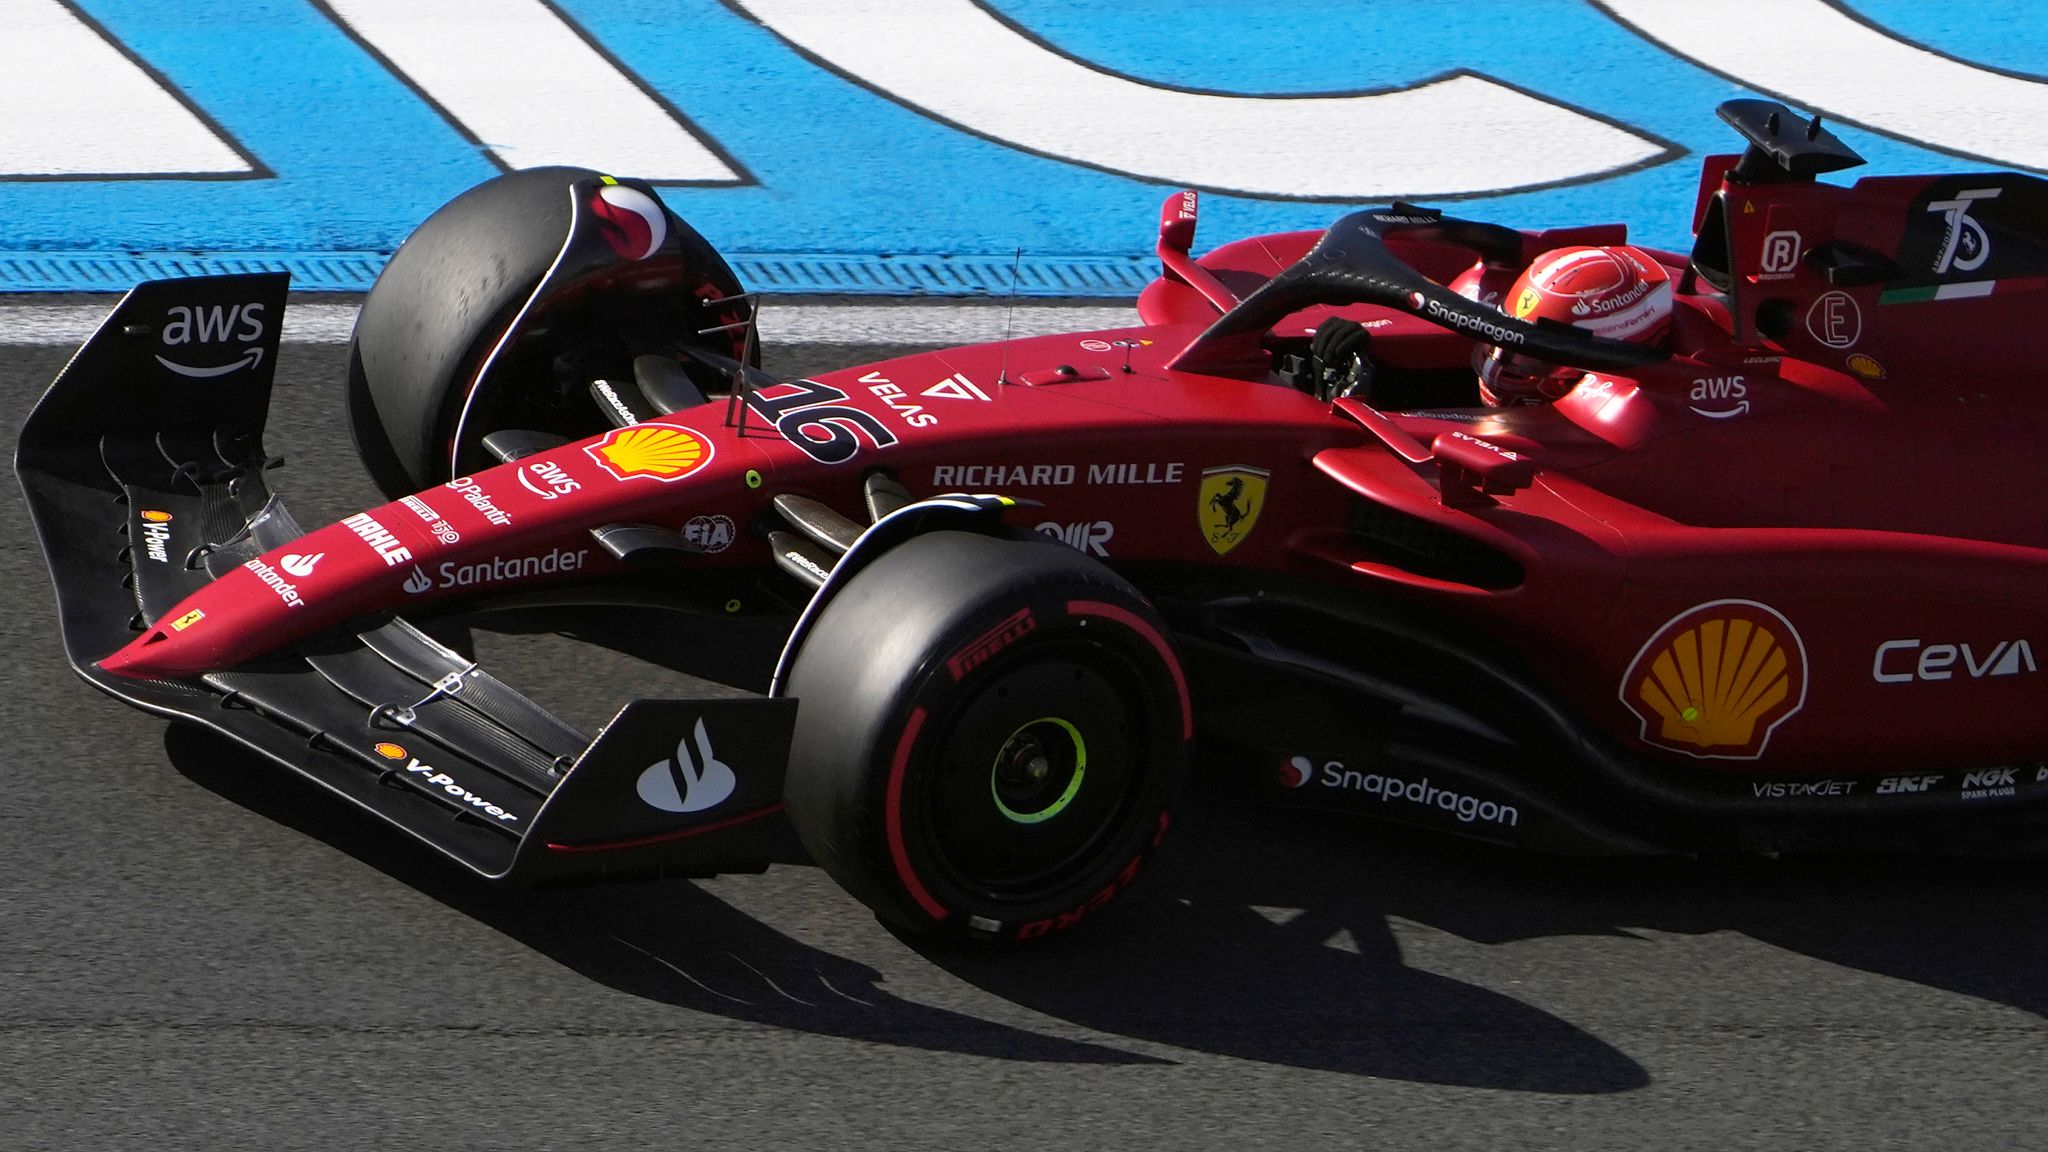 Dutch GP Charles Leclerc tops final practice from George Russell as Max Verstappen improves ahead of Zandvoort qualifying F1 News